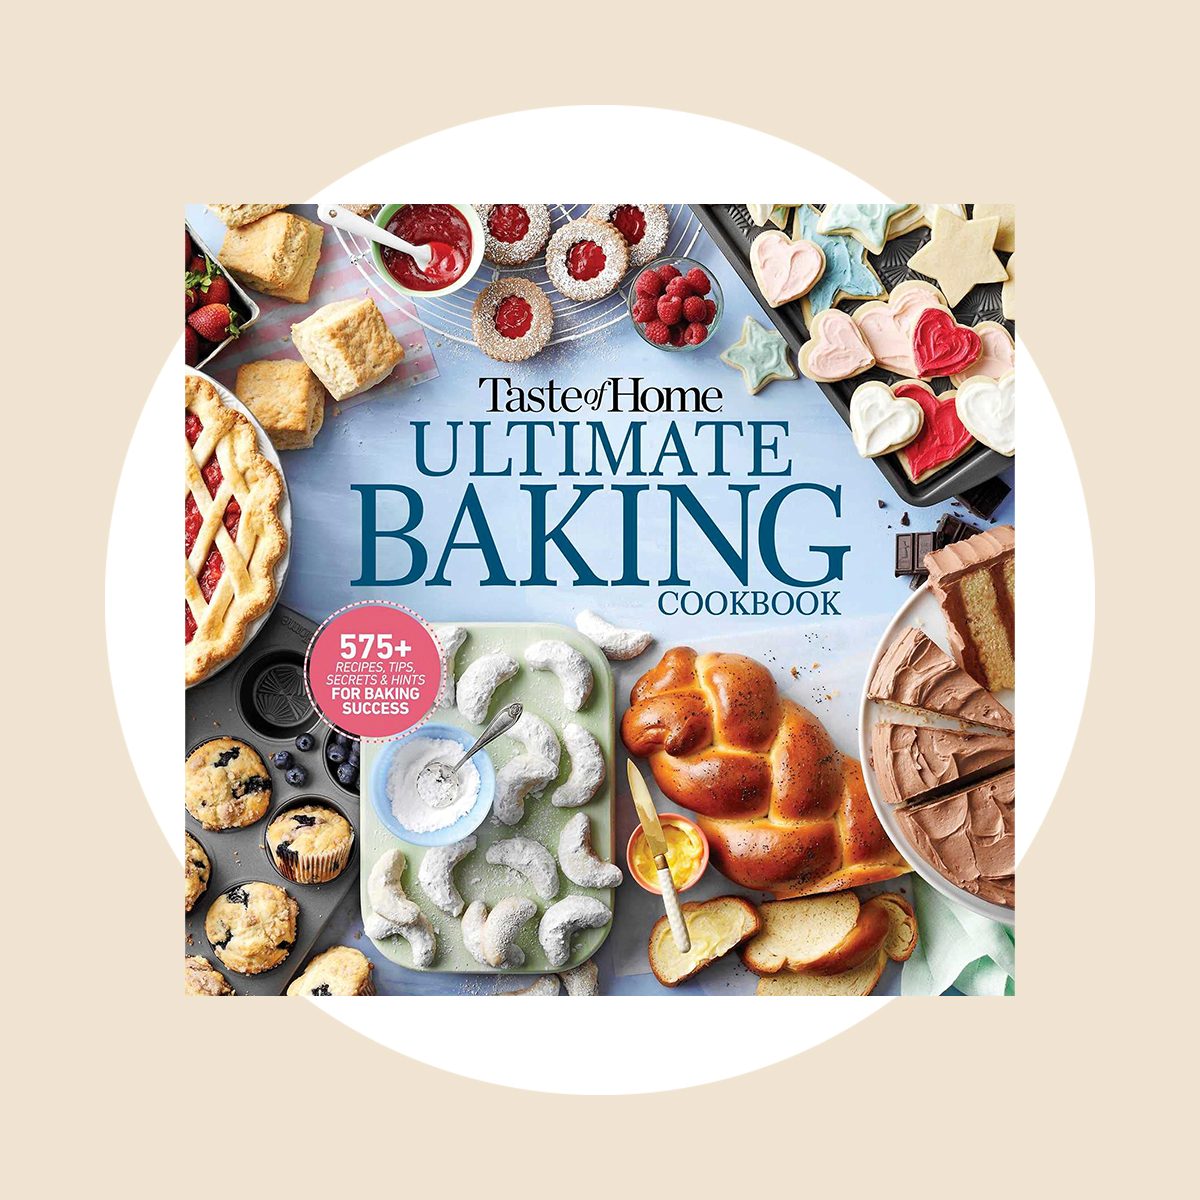 24 of the Best Baking Cookbooks to Fill Your Bookshelf and Kitchen